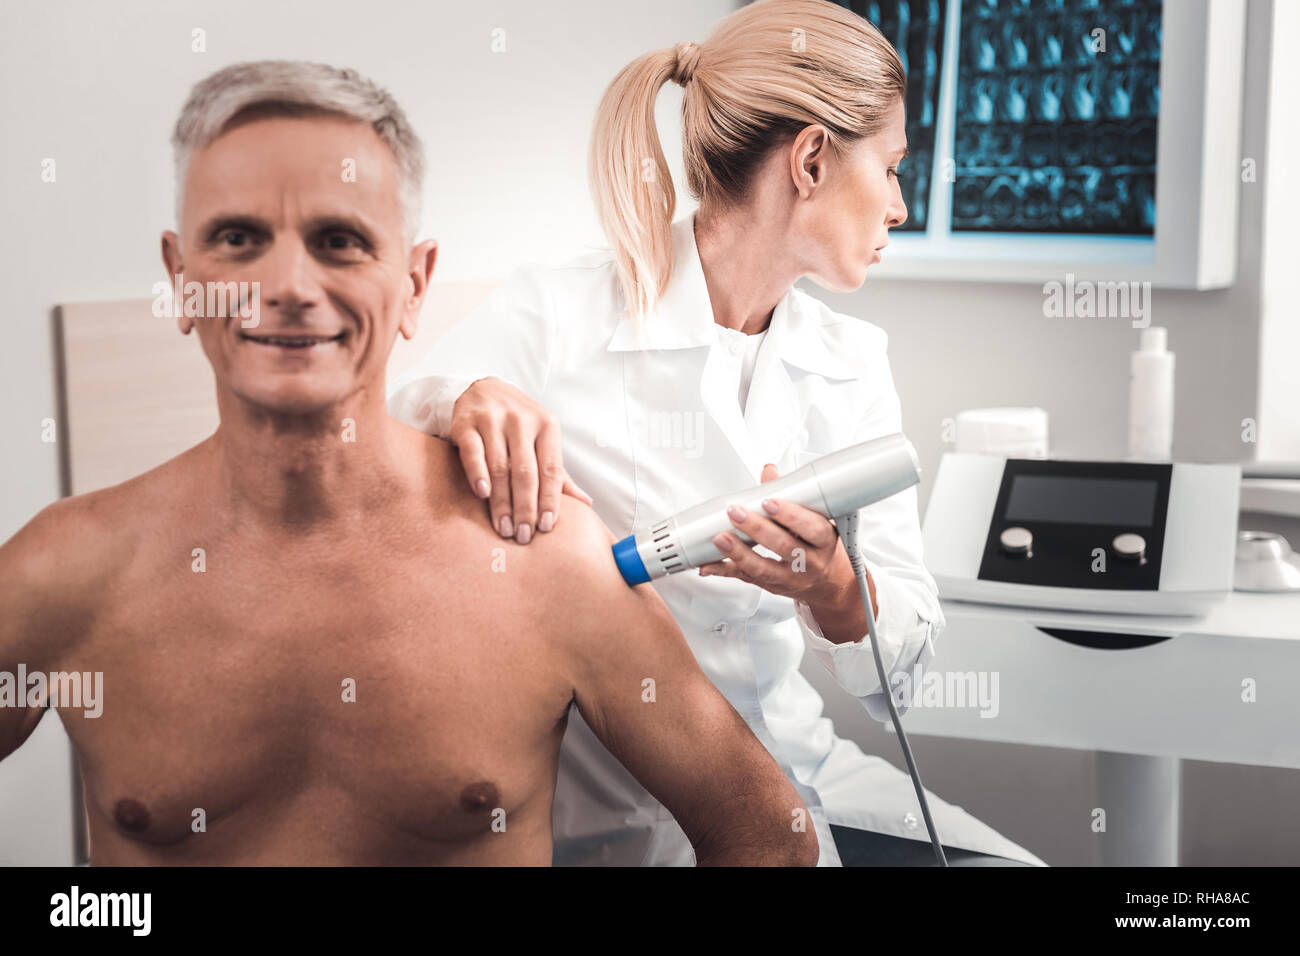 Young doctor using modern medical facilities for examination Stock Photo